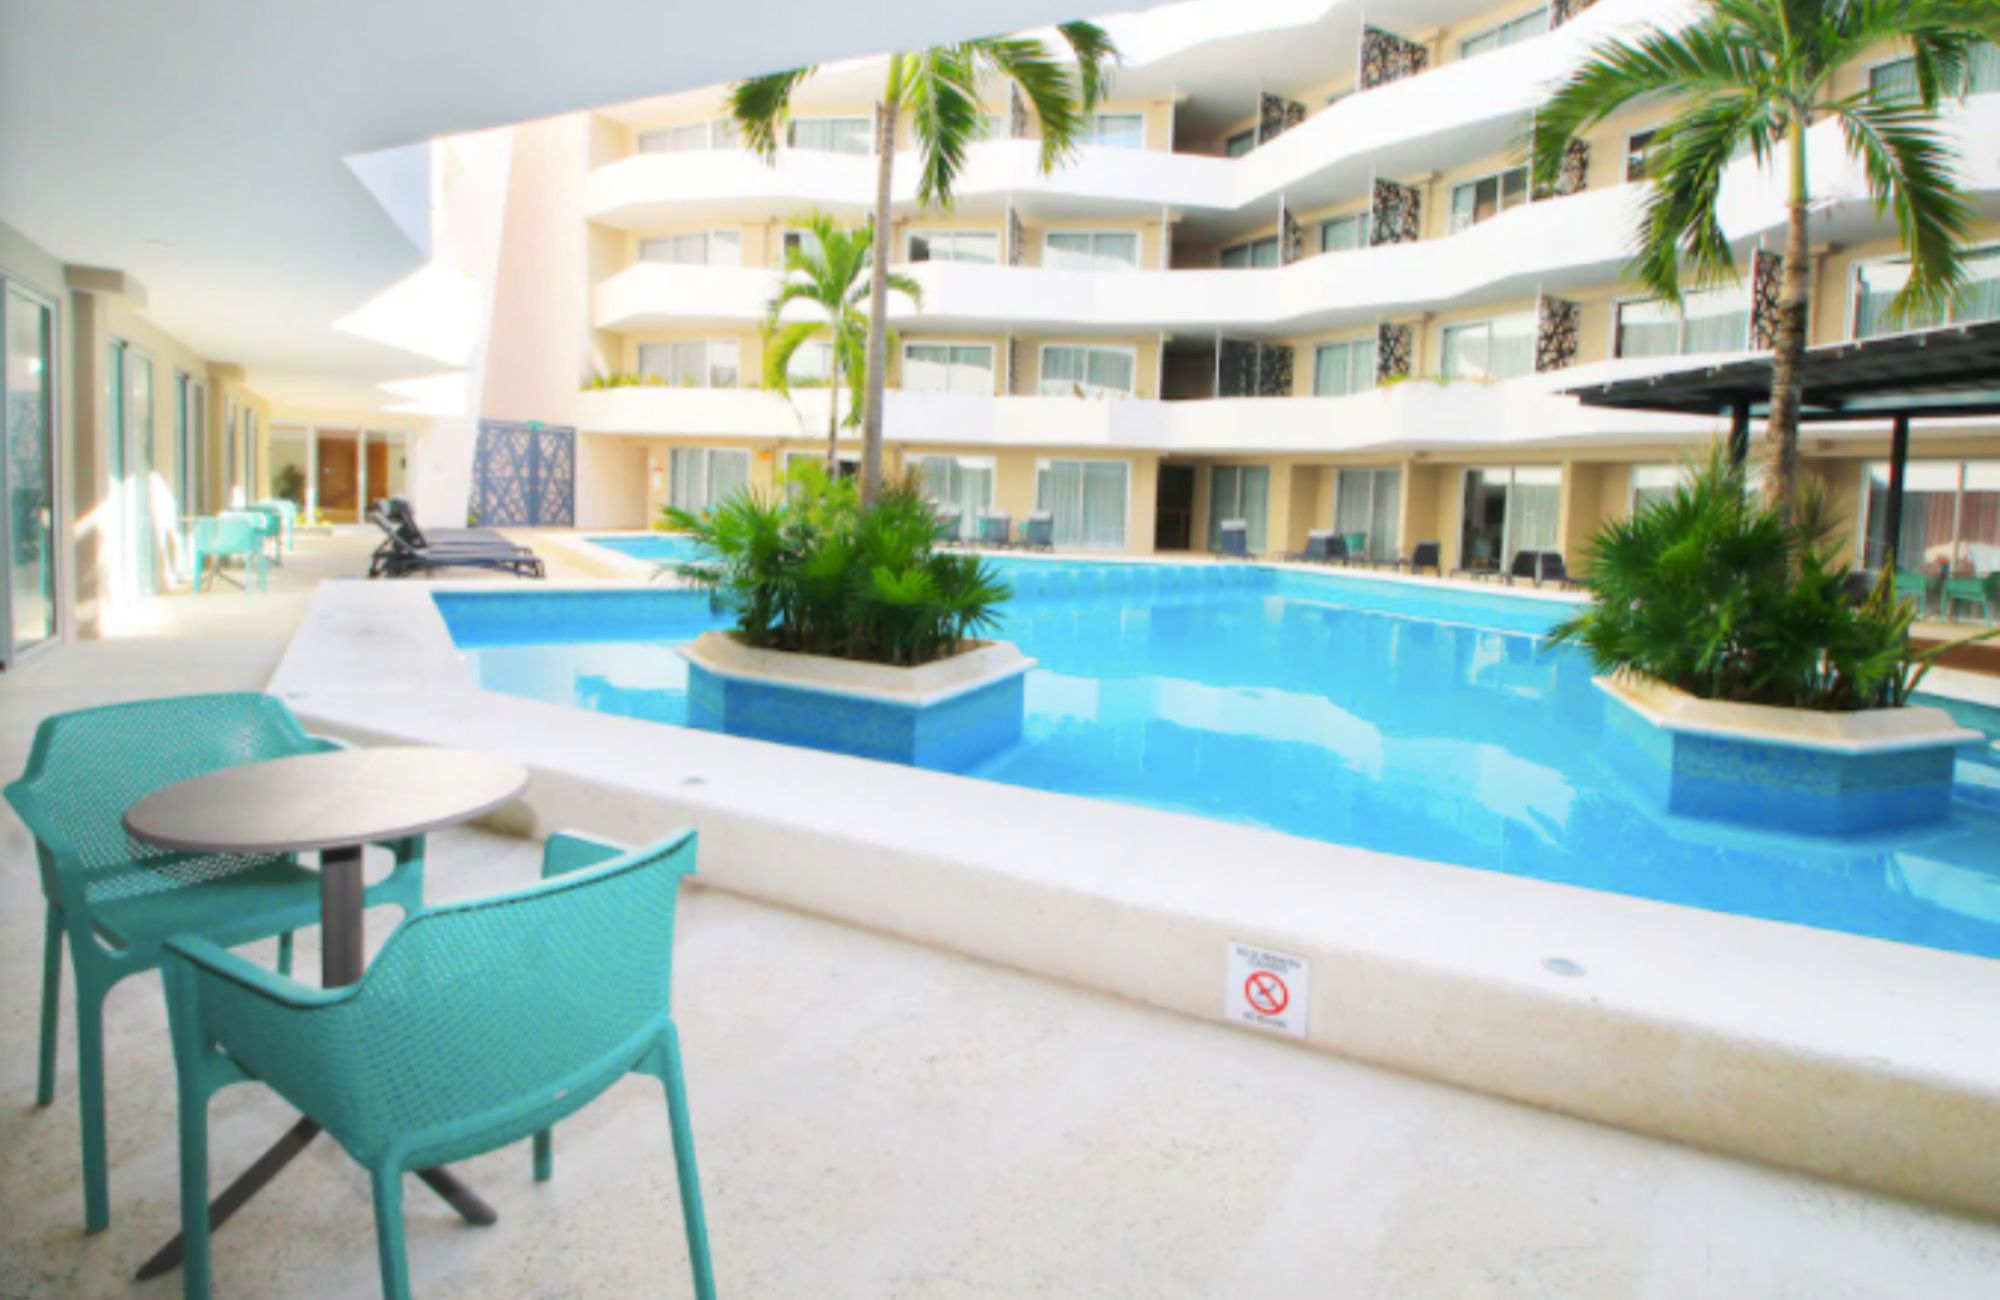 Condo with special discount, more than 15 amenities in pre-construction for sale Playa del Carmen